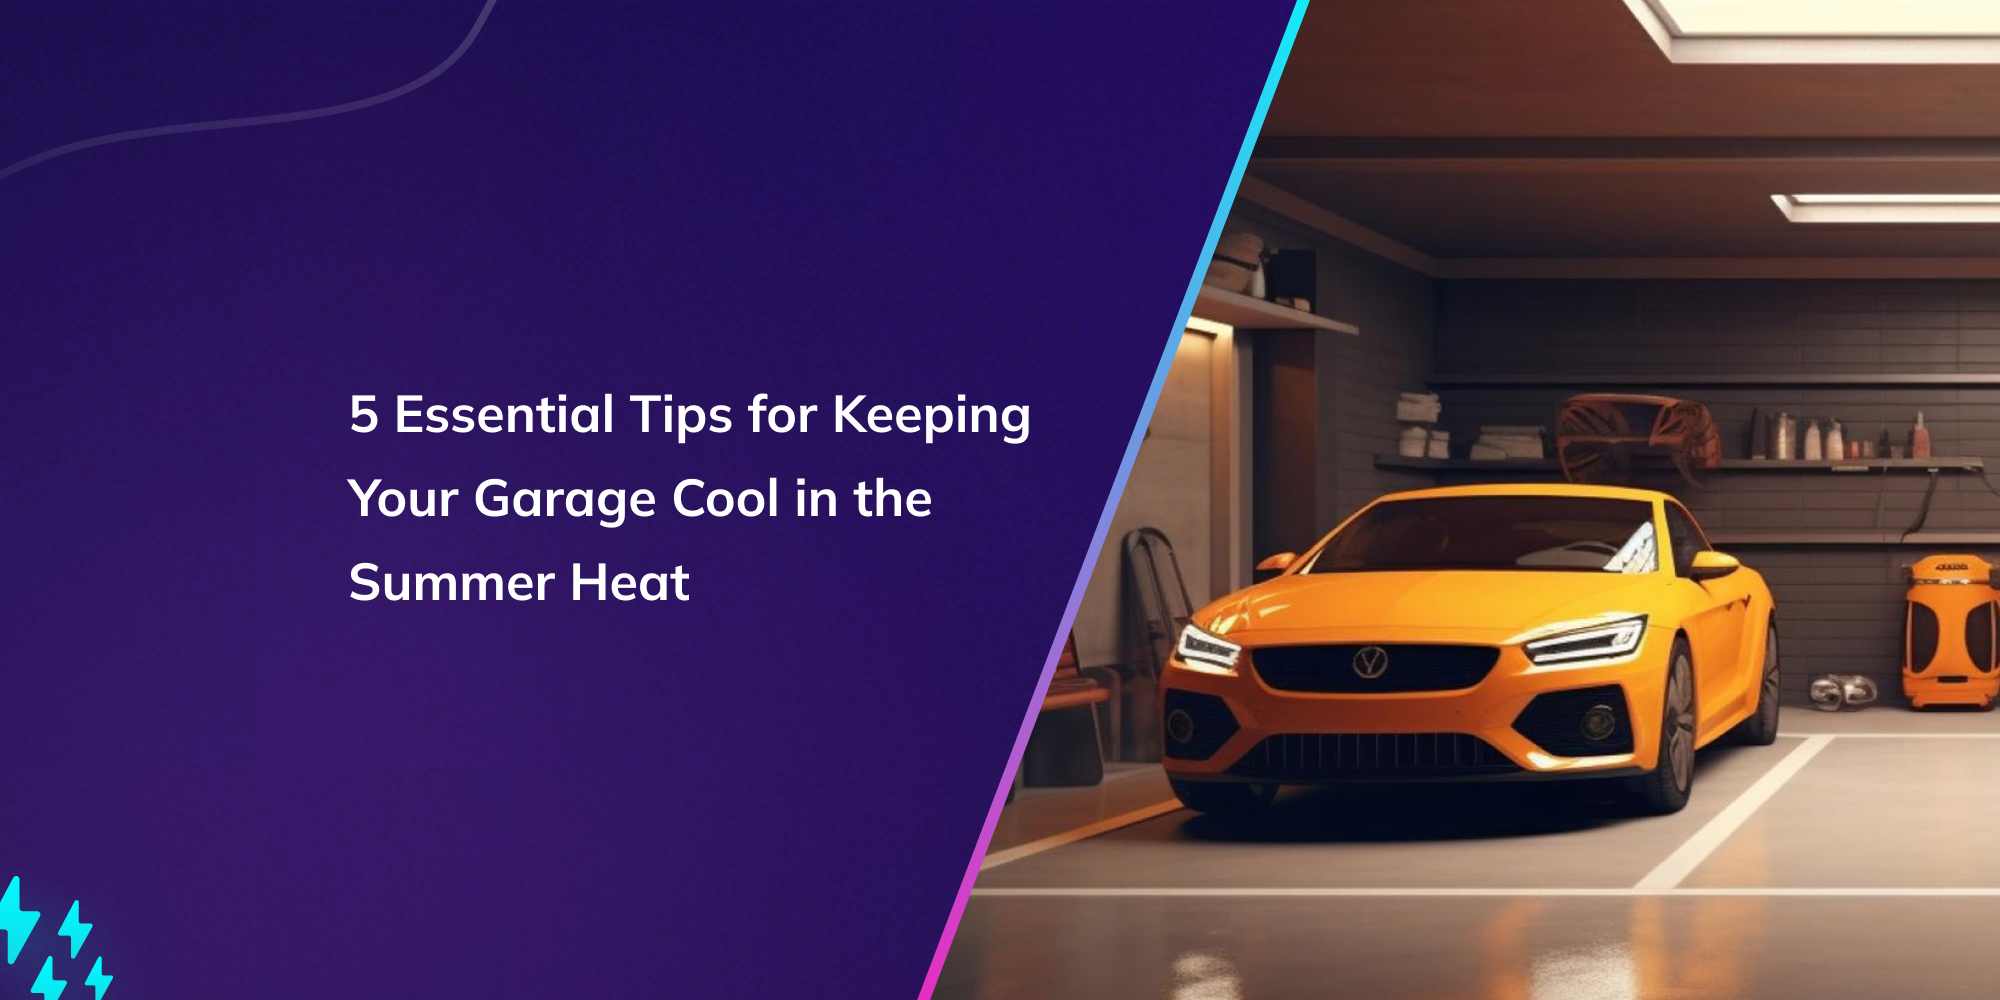 5 Essential Tips for Keeping Your Garage Cool in the Summer Heat